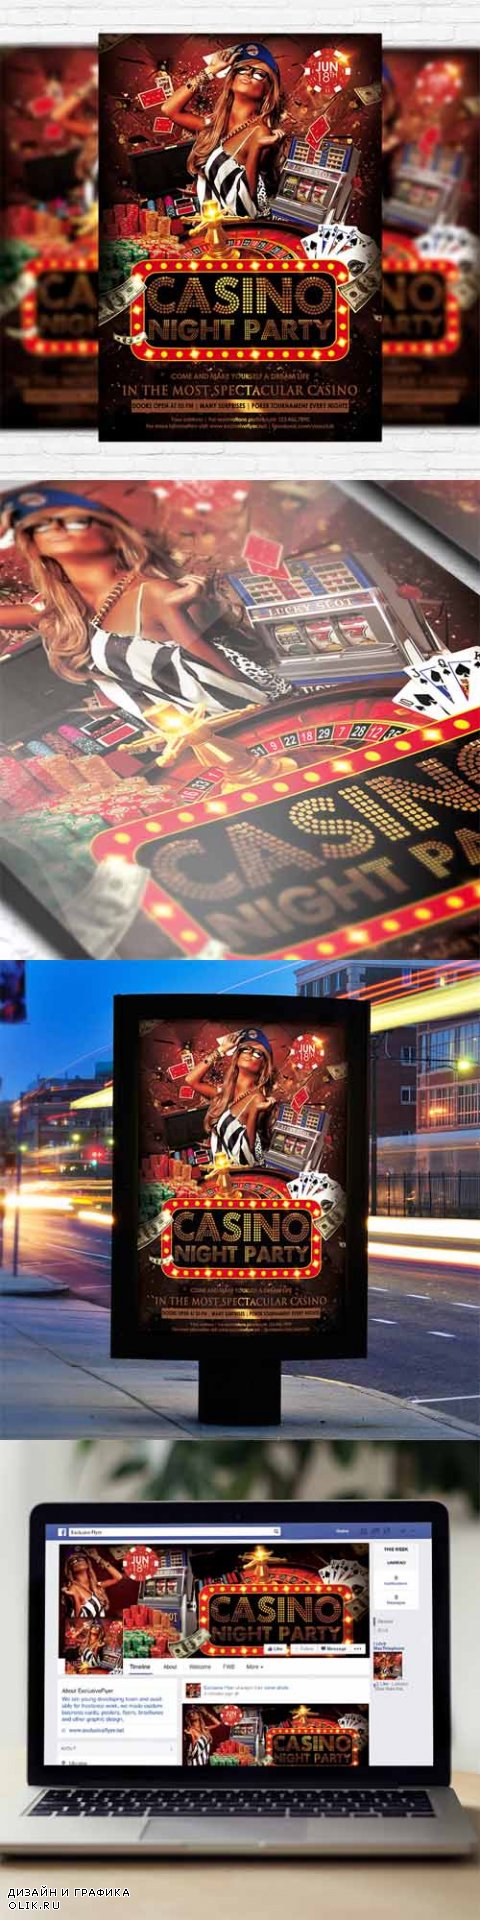 Flyer Template - Casino Night Party + Facebook Cover